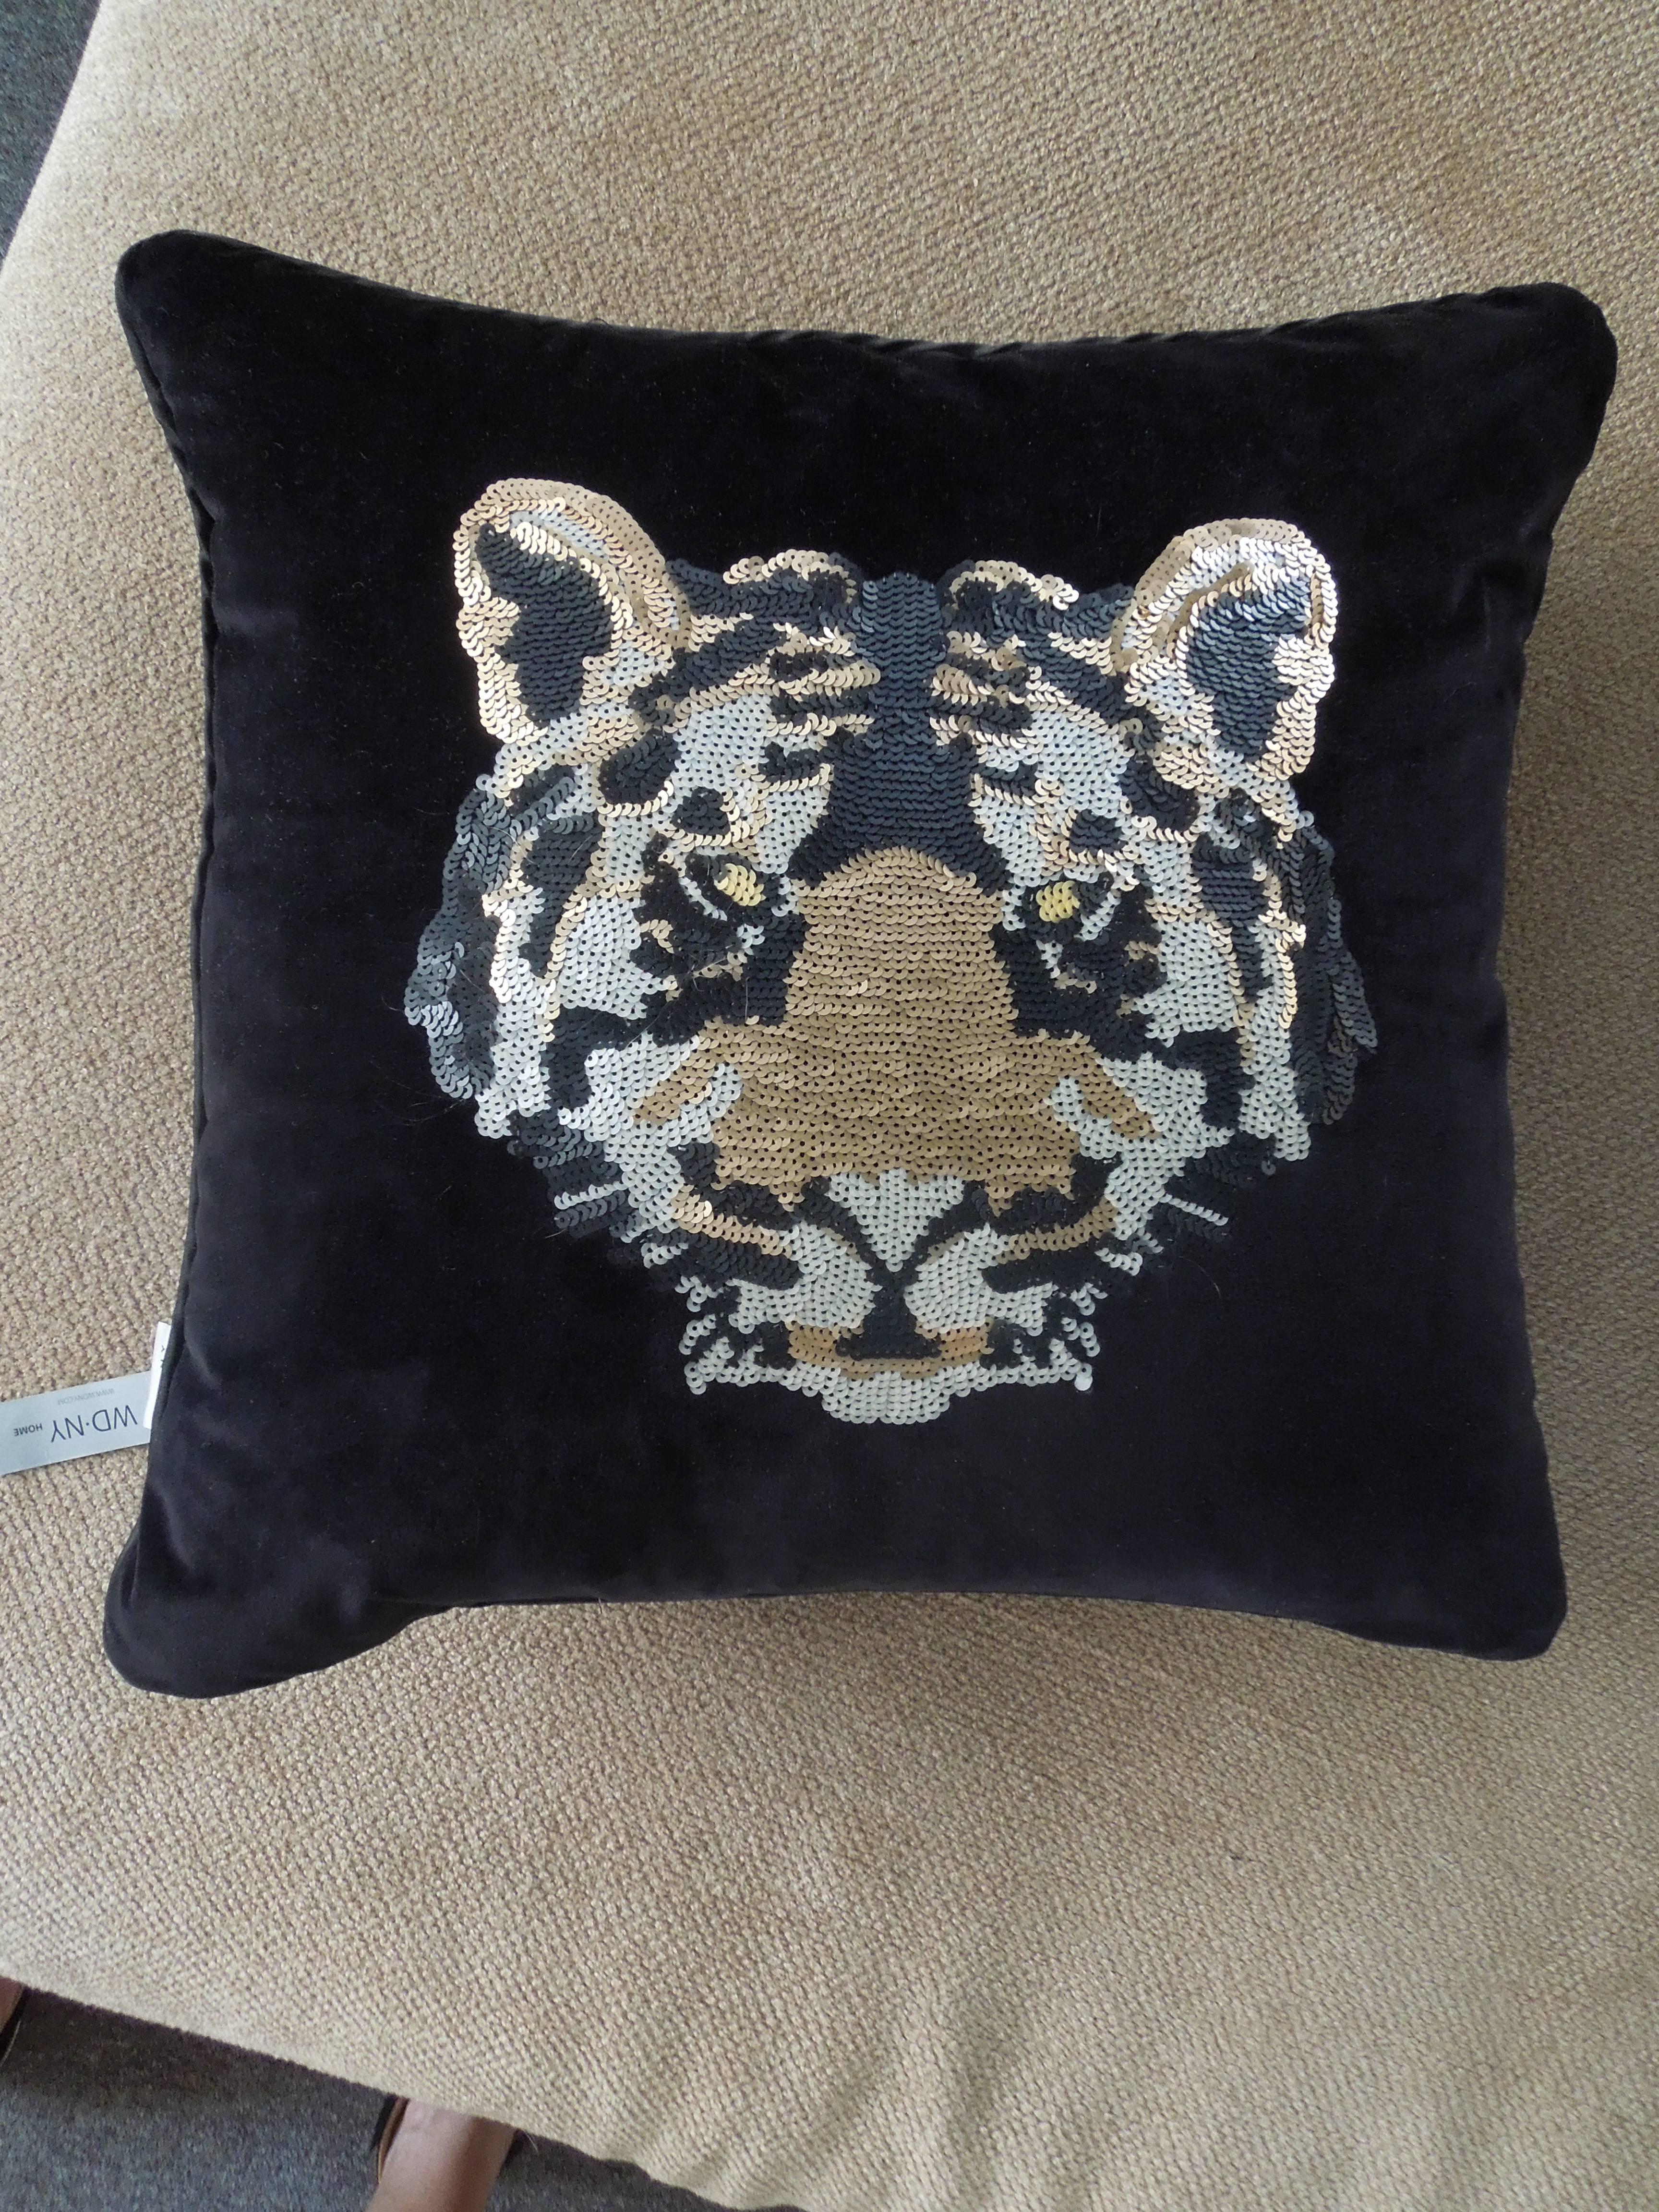 A beautiful pair of feather insert luxe, black velvet decorative pillows. Black satin piping and backs. The tiger faces are hand done sequined in bronze, silver and black colors. Made by WD NY. Never used.